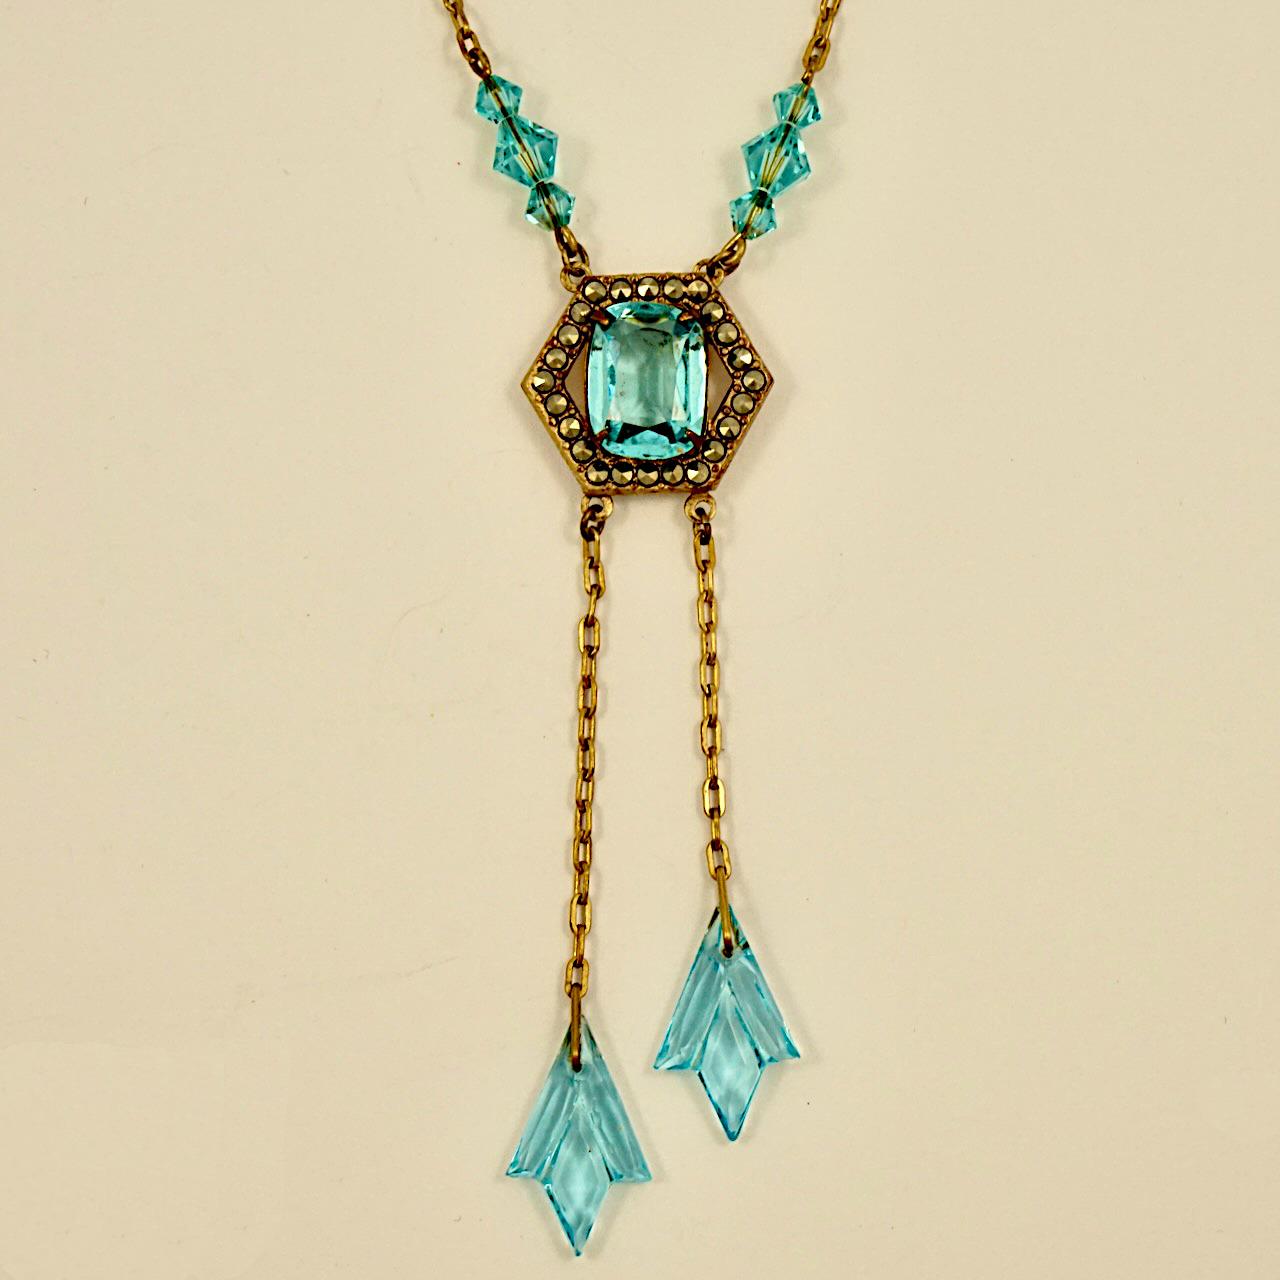 Beautiful Art Deco gold plated necklace, featuring aqua blue glass and a marcasite centrepiece with two drops. Measuring length 47.7 cm / 18.77 inches, and the centrepiece and longest glass drop is length 8 cm / 3.1 inch.

This is a fabulous aqua